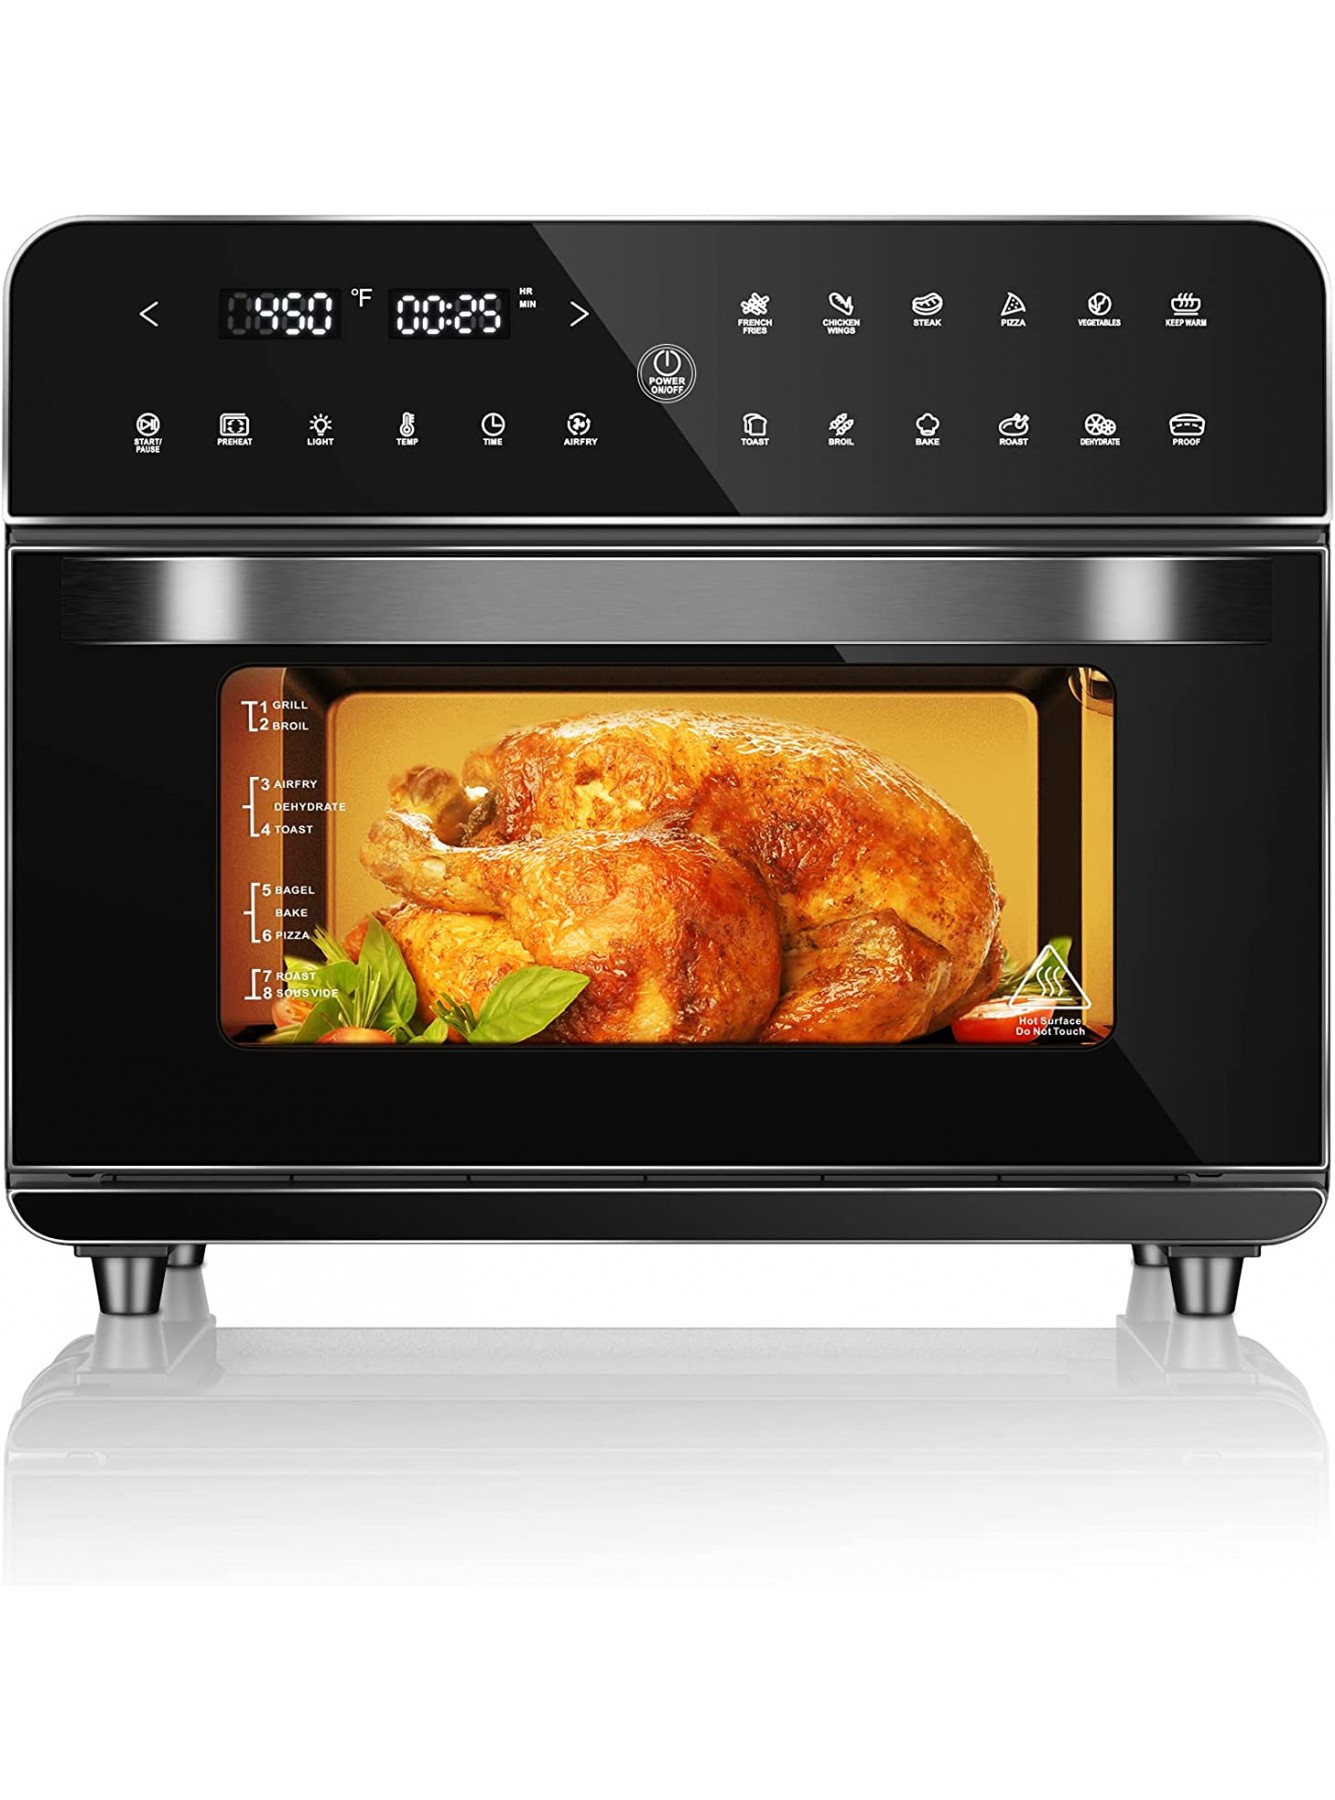 Air Fryer Oven 12 in 1 Air Fryer Toaster Oven with Digital Touchscreen 1800W Convection Oven Countertop Combo with 26.3 QT 25L Large Capacity Oil-free Easy Cooking 5 Accessories Black B09LR12R5K